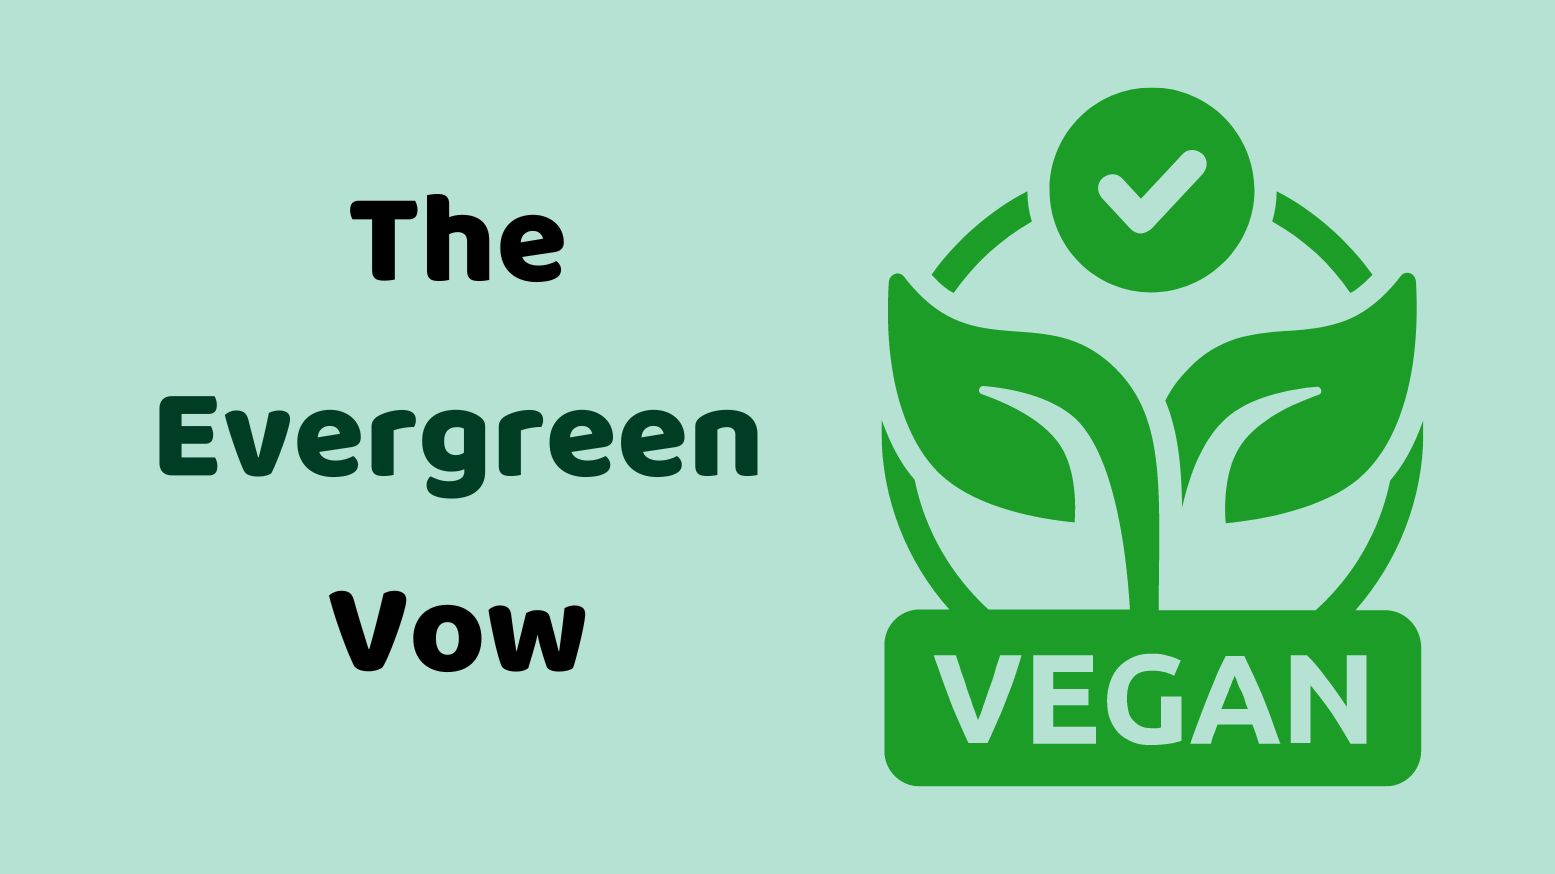 The Evergreen Vow